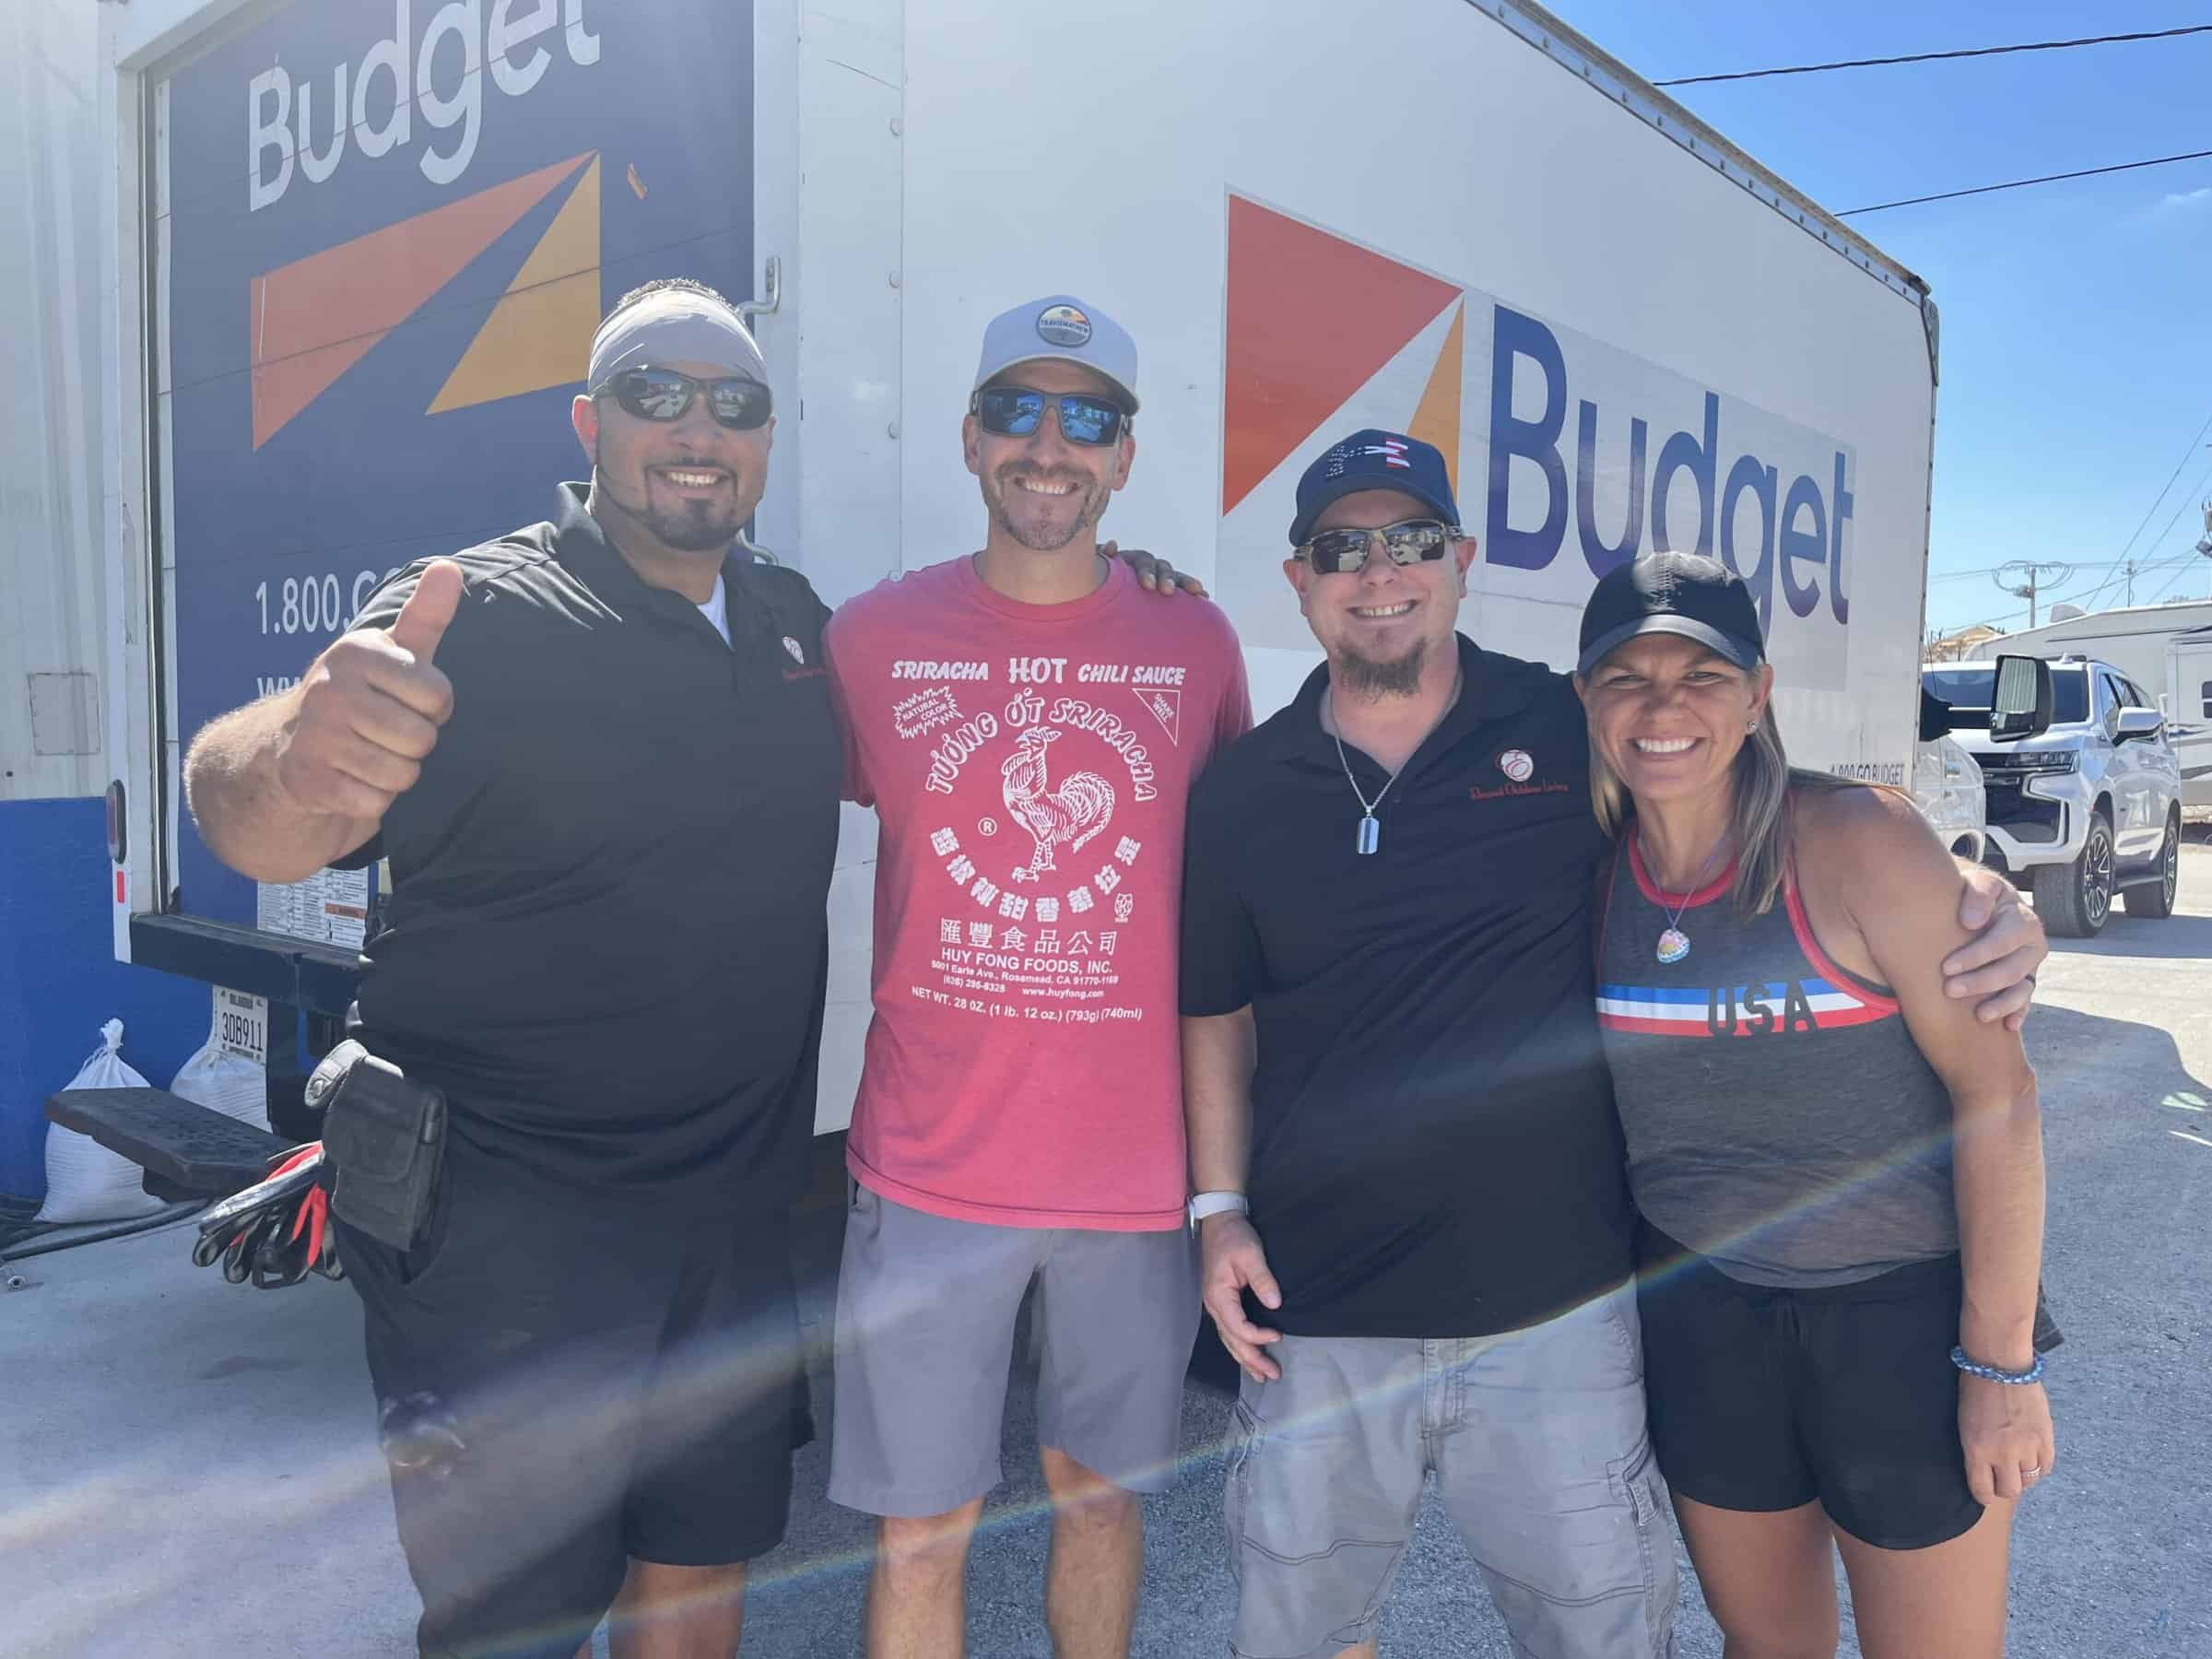 Elegant Outdoor Living's crew smiling posing together from left to right Al (left), owner Nate (middle left), CJ (middle right), and Stephanie (right) in front of a box truck full of donations at the FMB Strong charity location